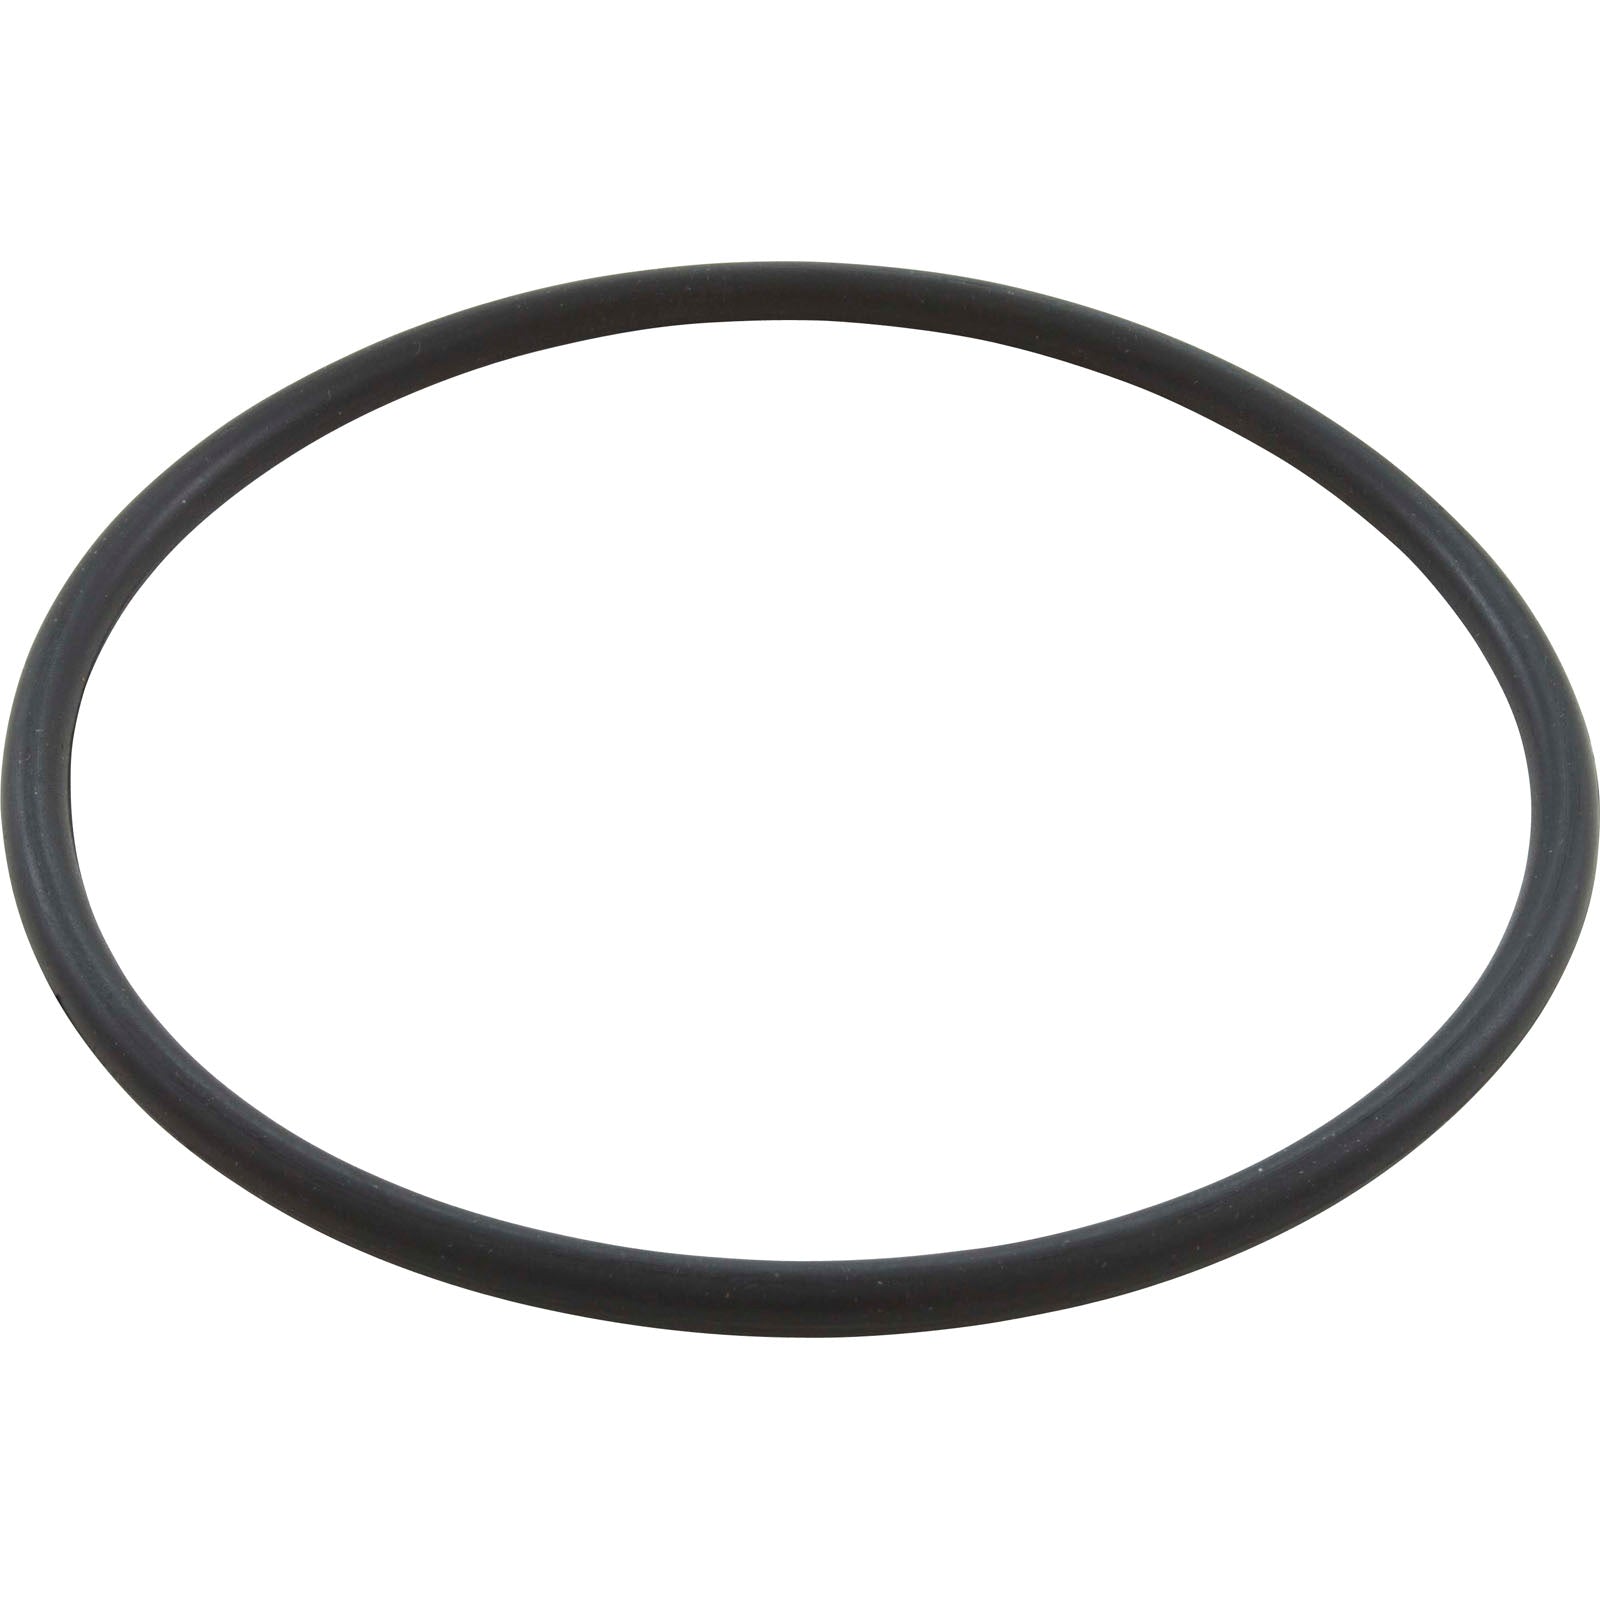 O-Ring, Speck 21-80 G/GS/30 G, Union/ 2902041252